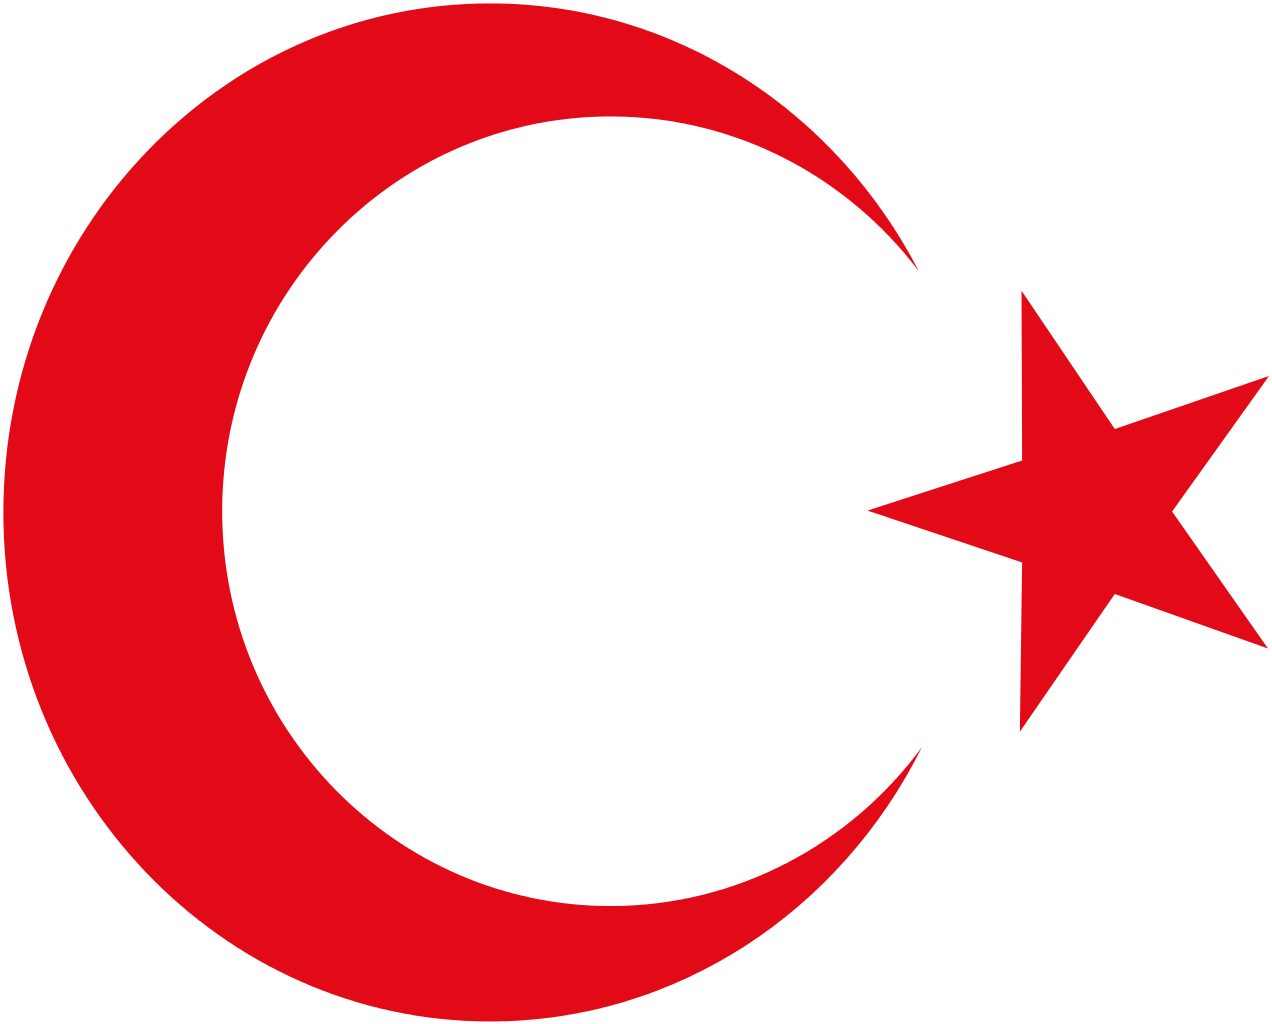 Turkey And Emblem Of National Moon Flag Clipart